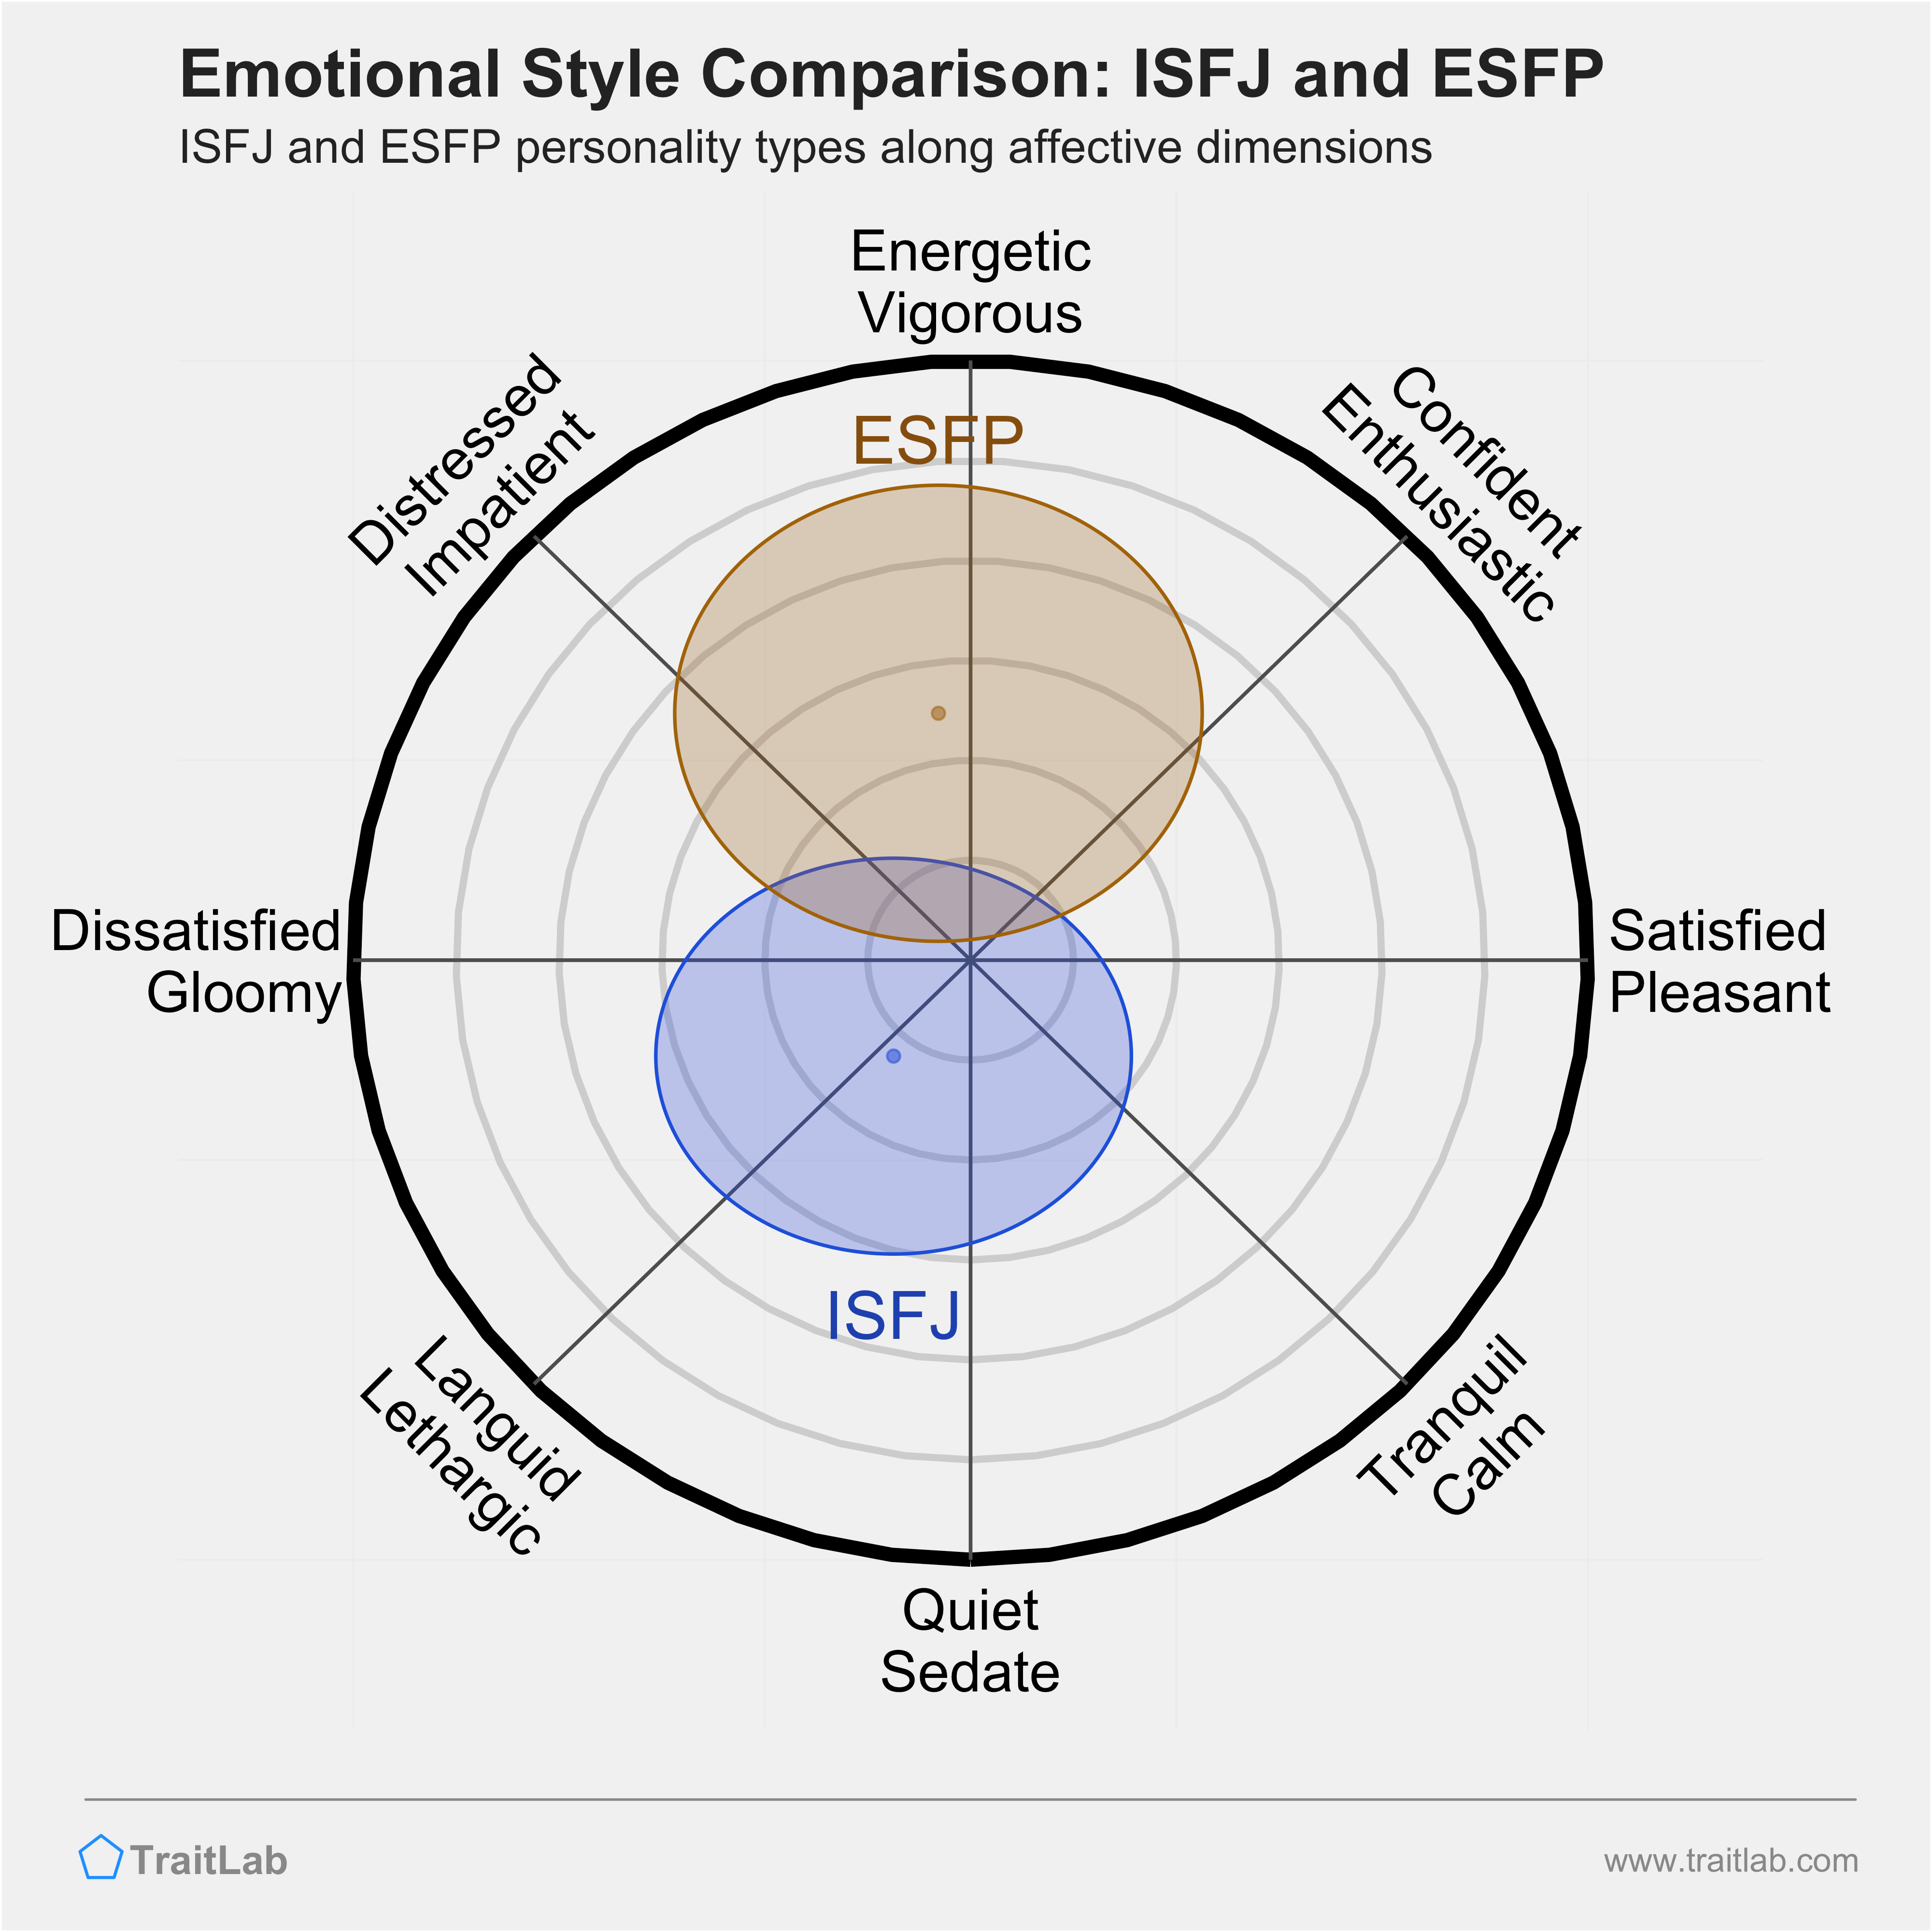 ISFJ and ESFP comparison across emotional (affective) dimensions